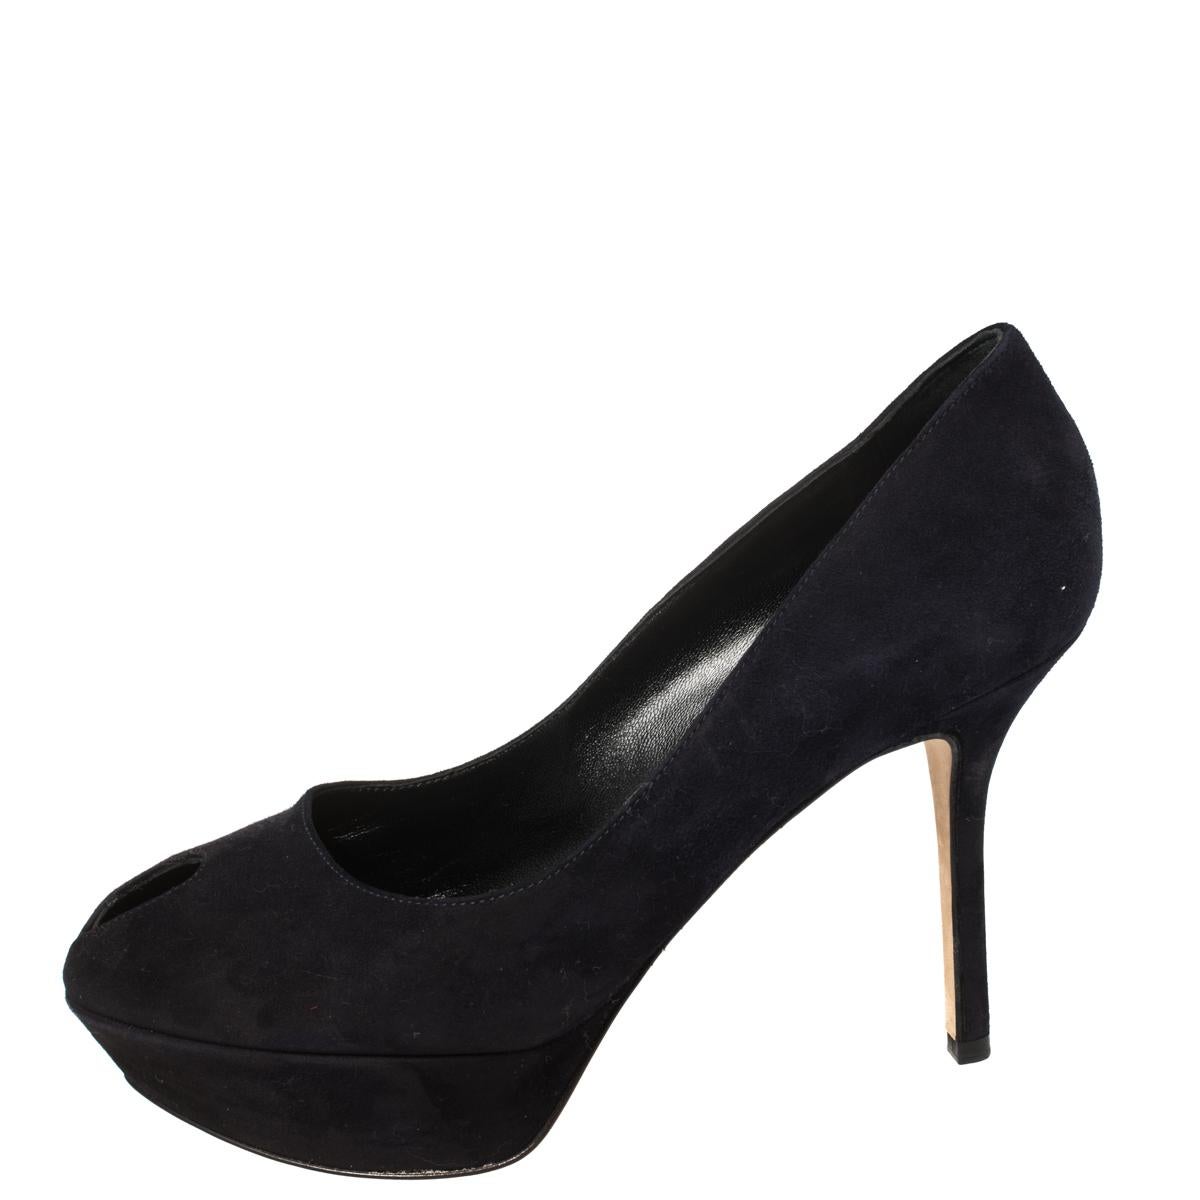 Project an elegant take in a comfortable manner with these timeless pumps by Sergio Rossi. Crafted in Italy from suede in a navy blue shade, they feature peep toes and 11 cm heels supported by platforms.

